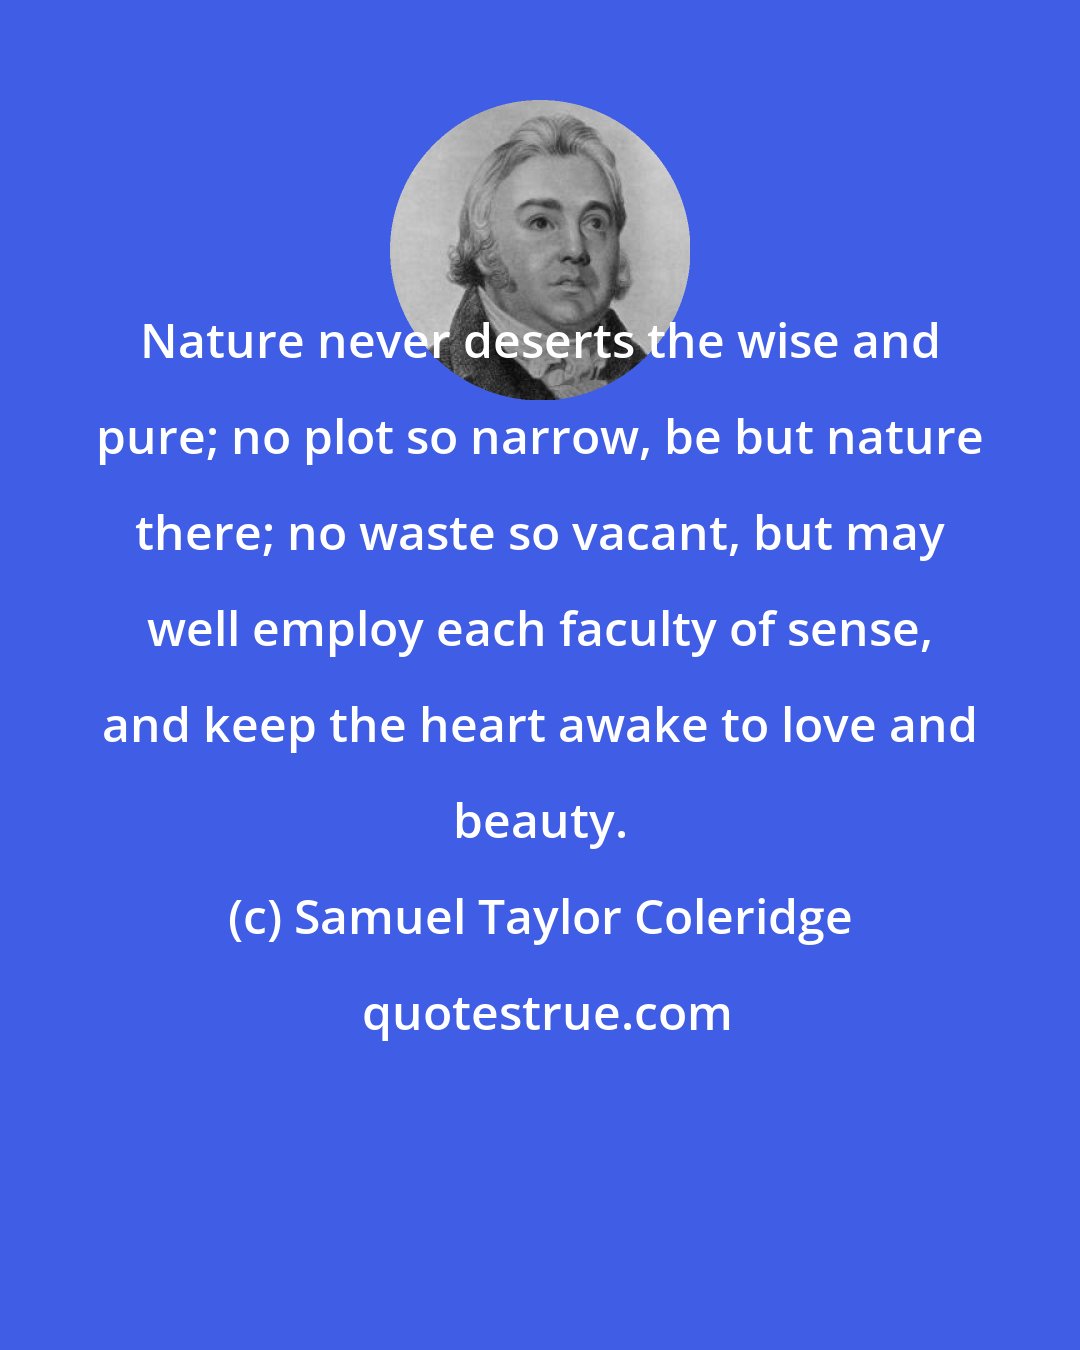 Samuel Taylor Coleridge: Nature never deserts the wise and pure; no plot so narrow, be but nature there; no waste so vacant, but may well employ each faculty of sense, and keep the heart awake to love and beauty.